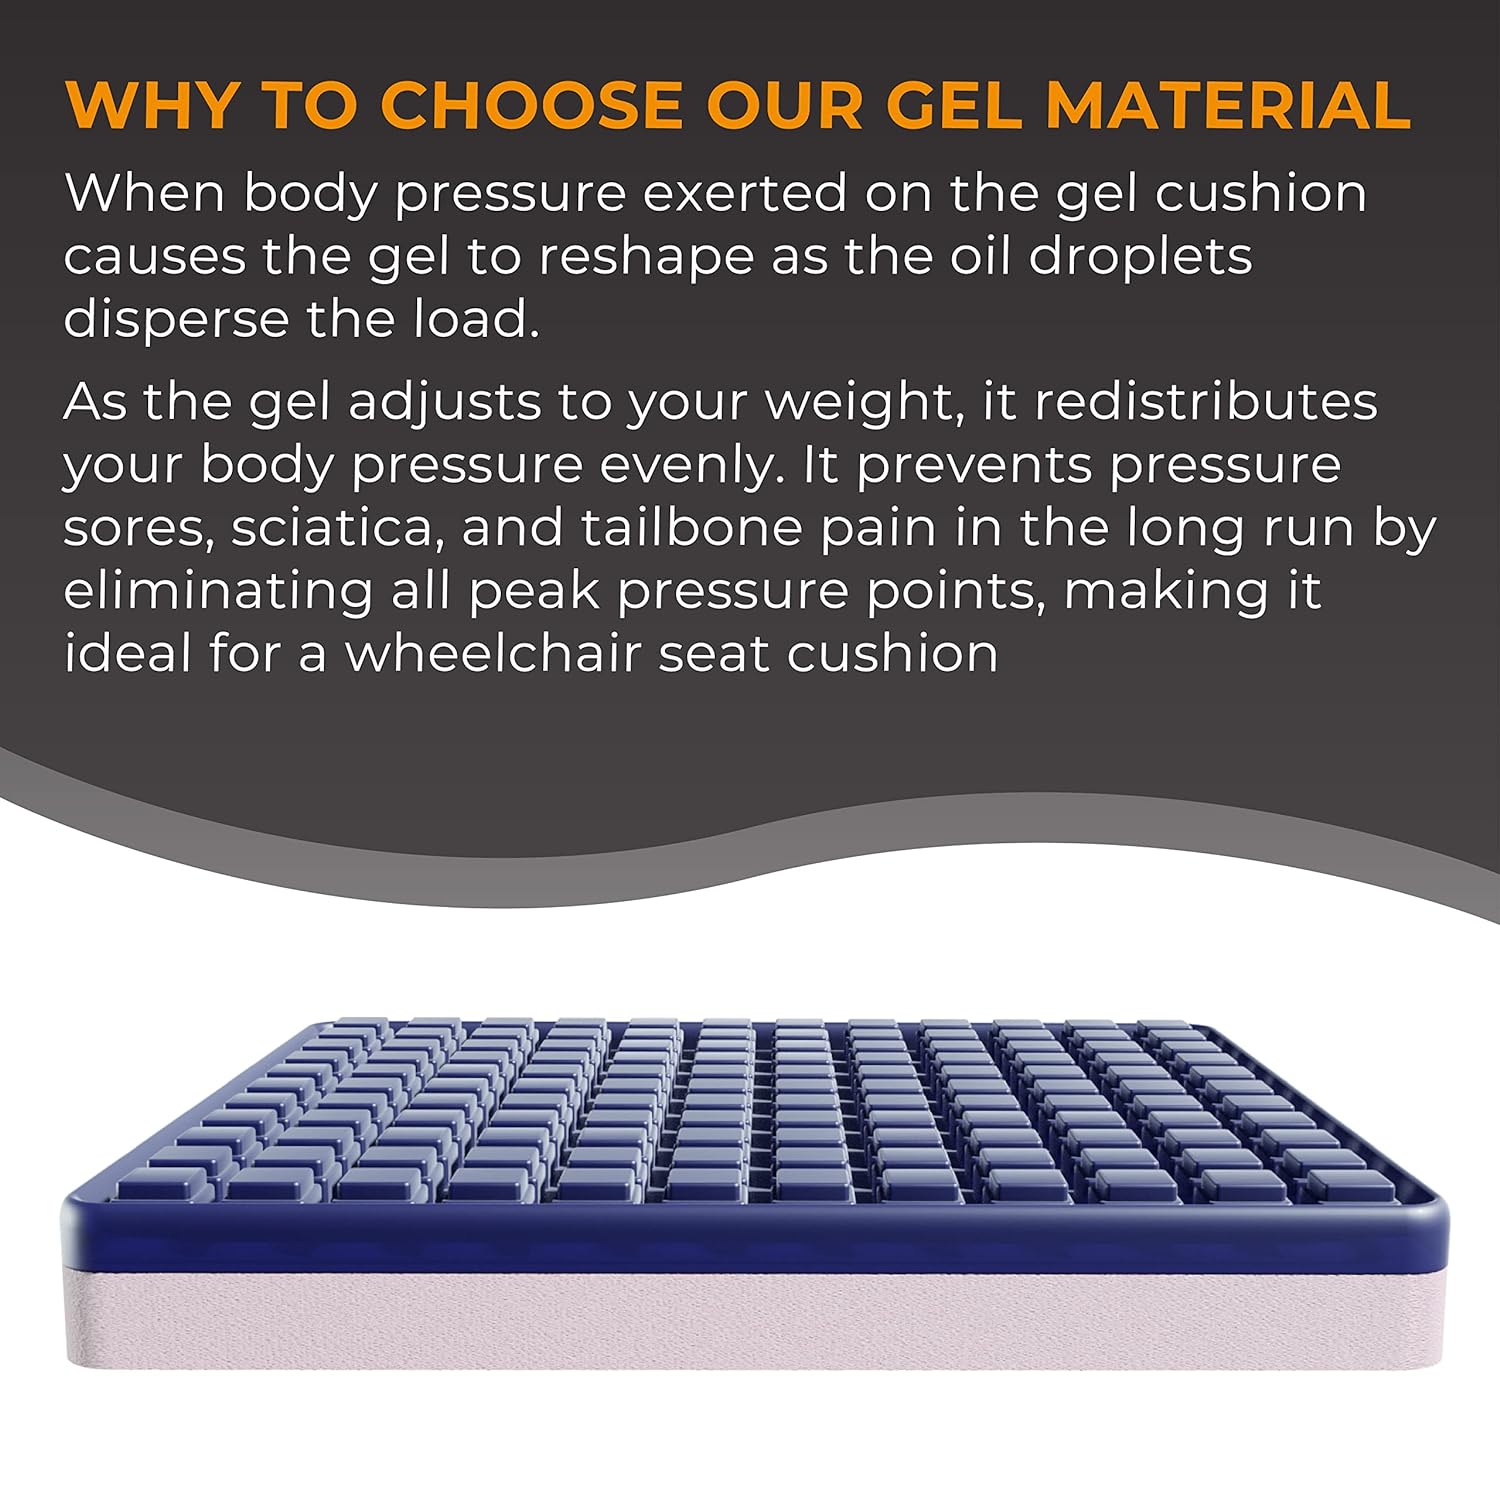 GELRIDE Gel Seat Cushion - Prevents Pressure Sores, Sciatica and Tailbone  Pain - Grid Design, Cool, Soft & Large - for Office Chair, Wheelchair -  Made